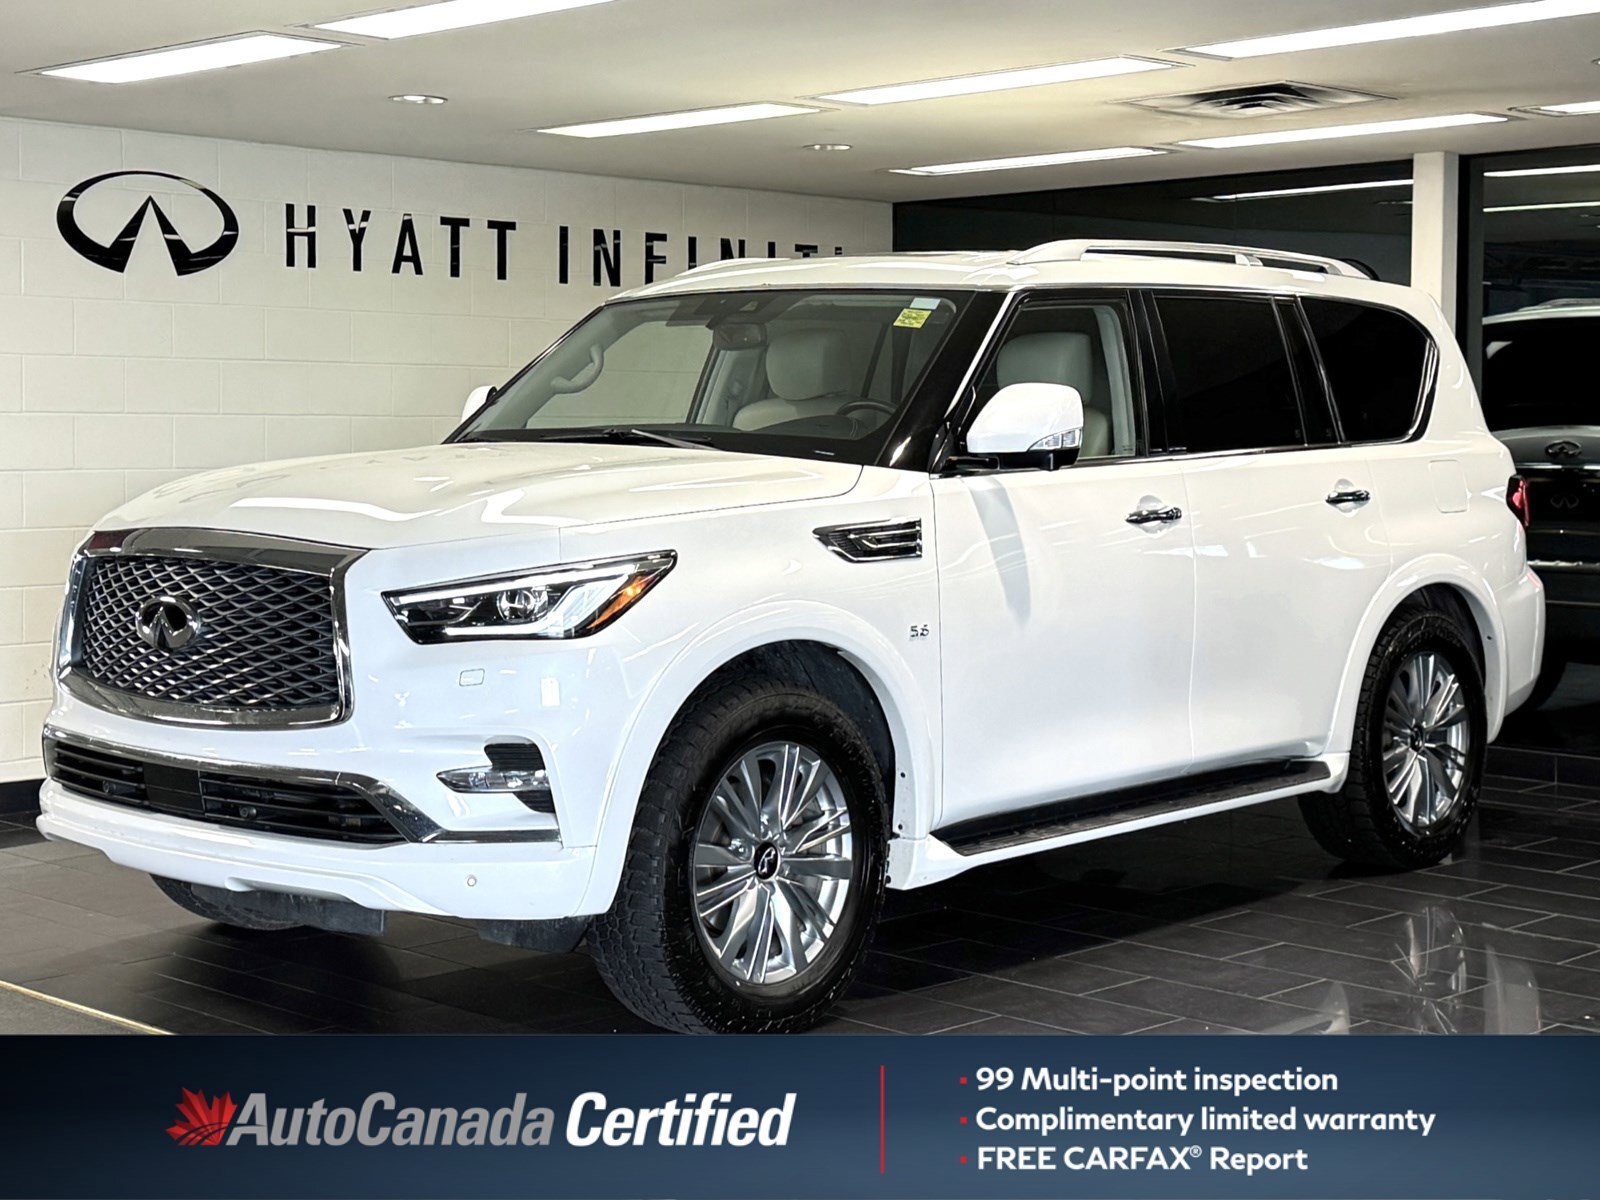 2019 Infiniti QX80 LUXE 8 Passenger - No Accidents | One Owner | Air 